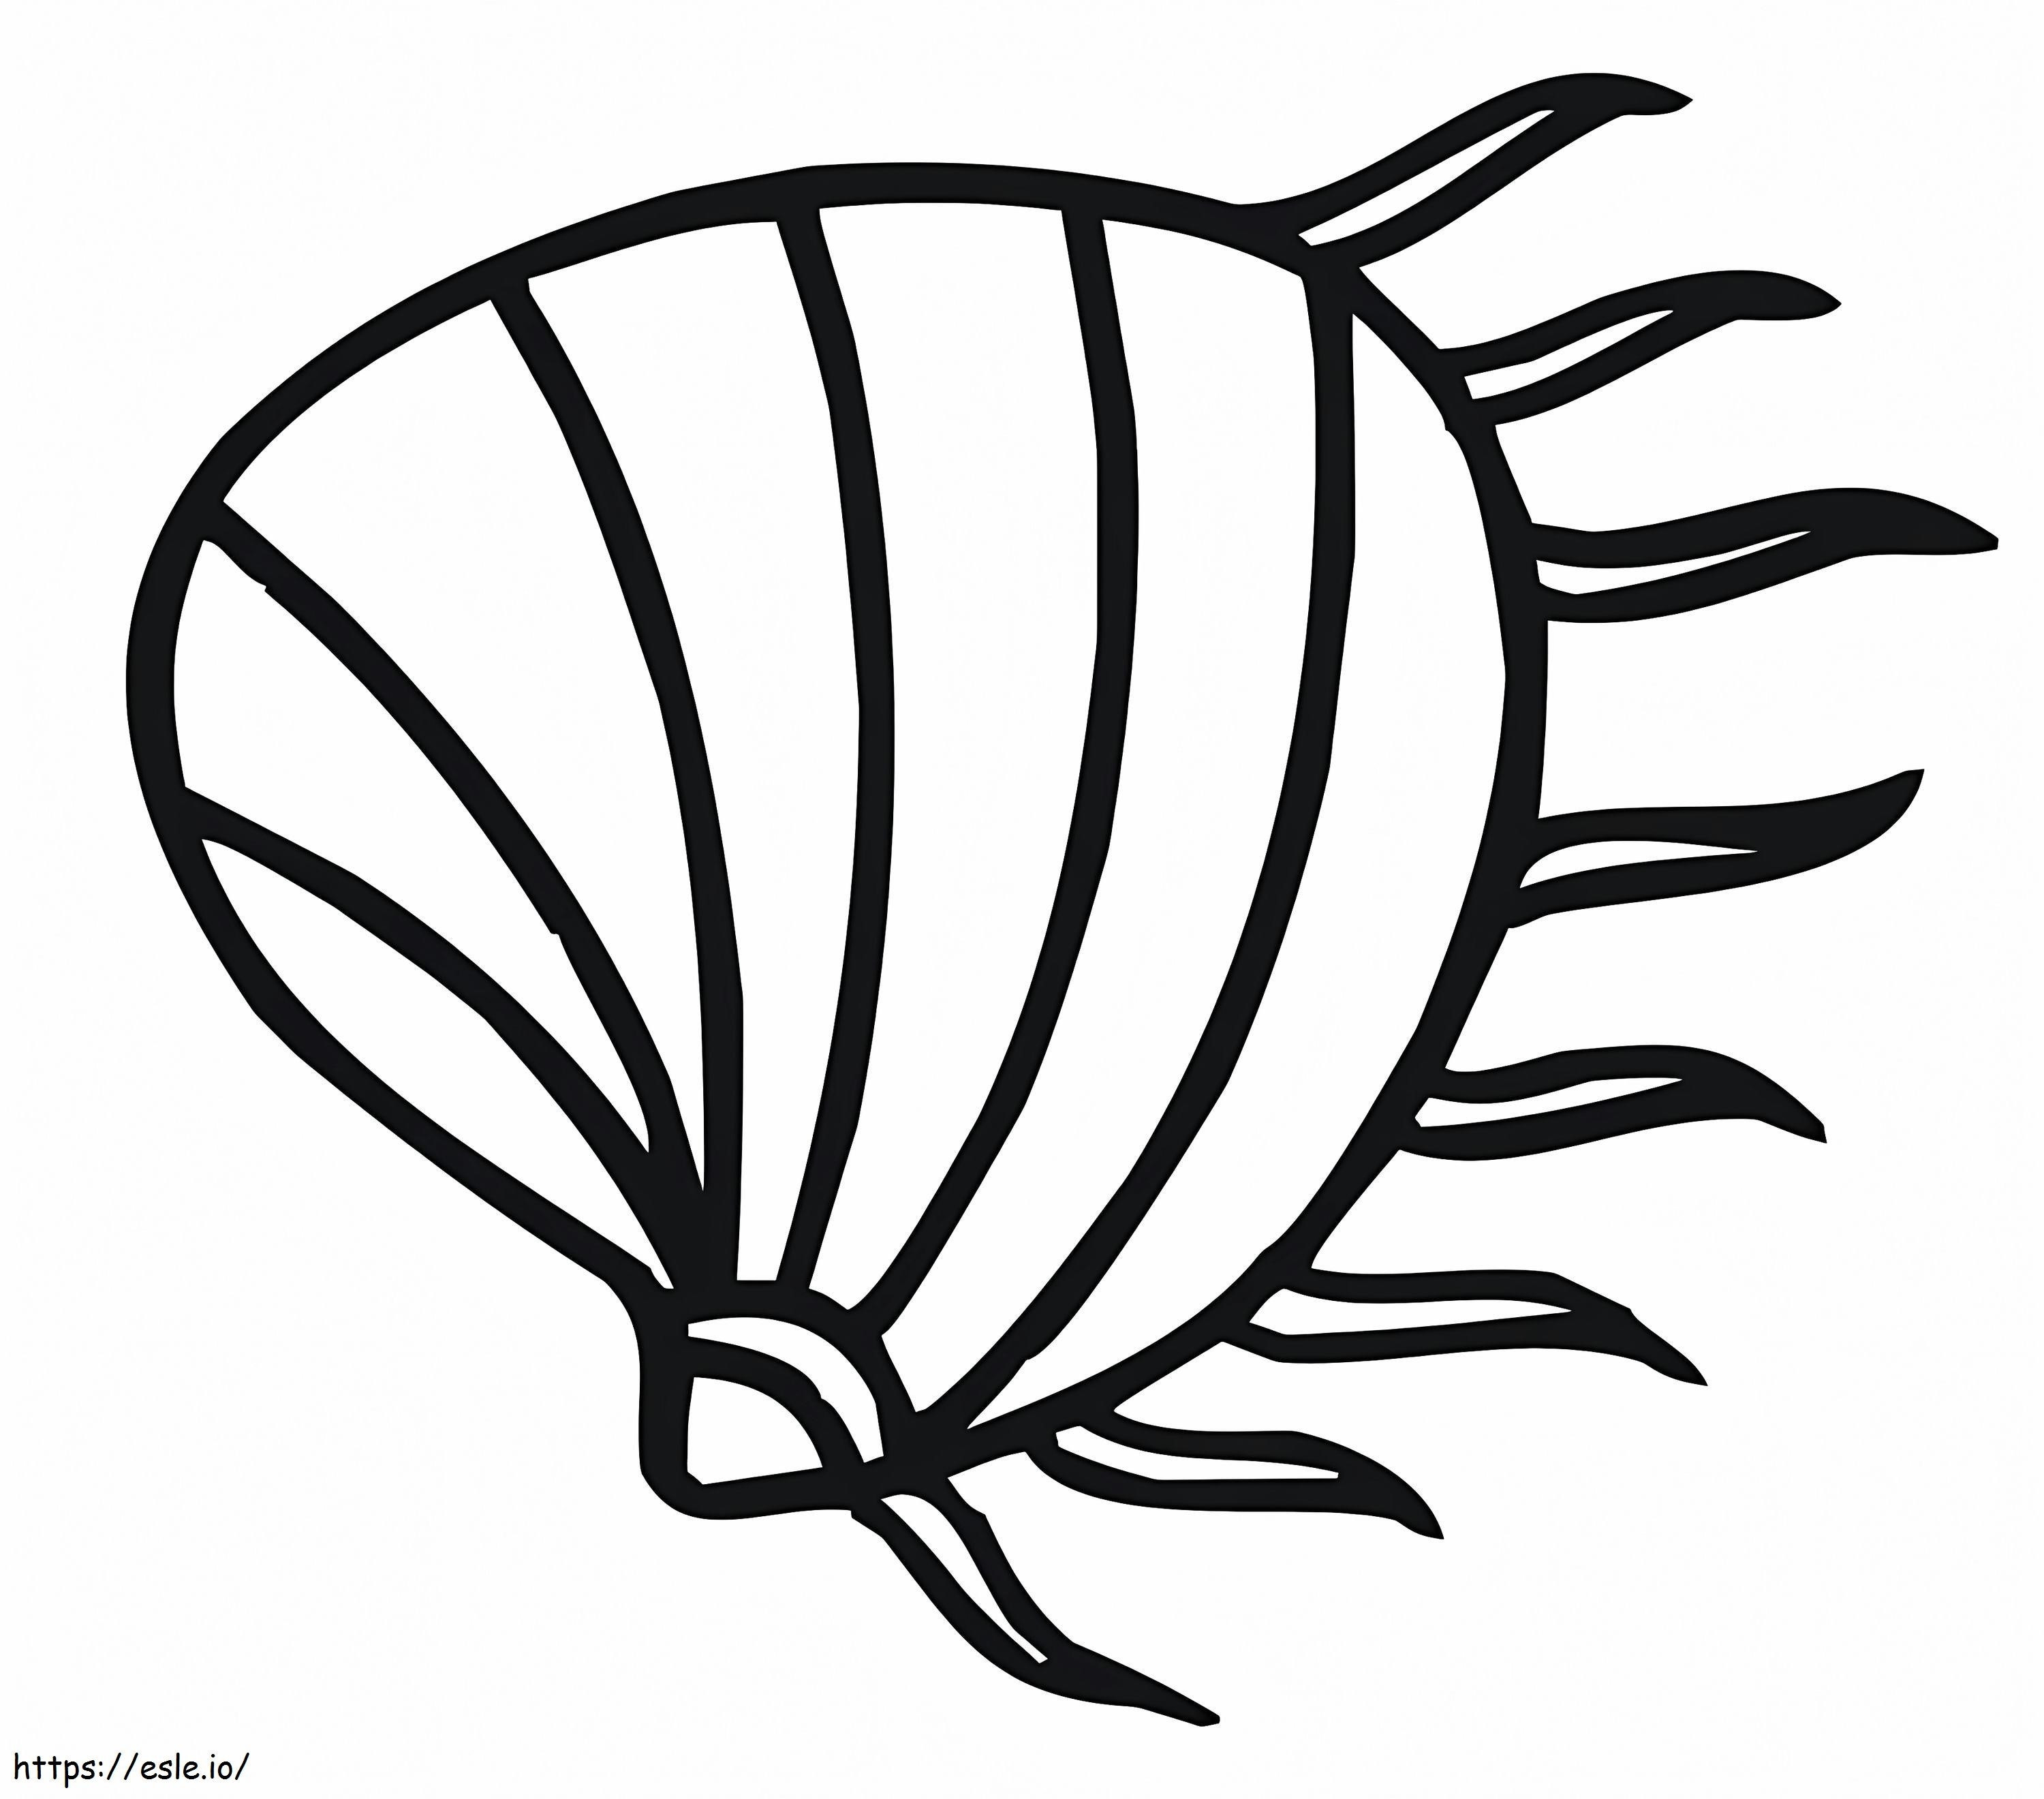 A Clam coloring page